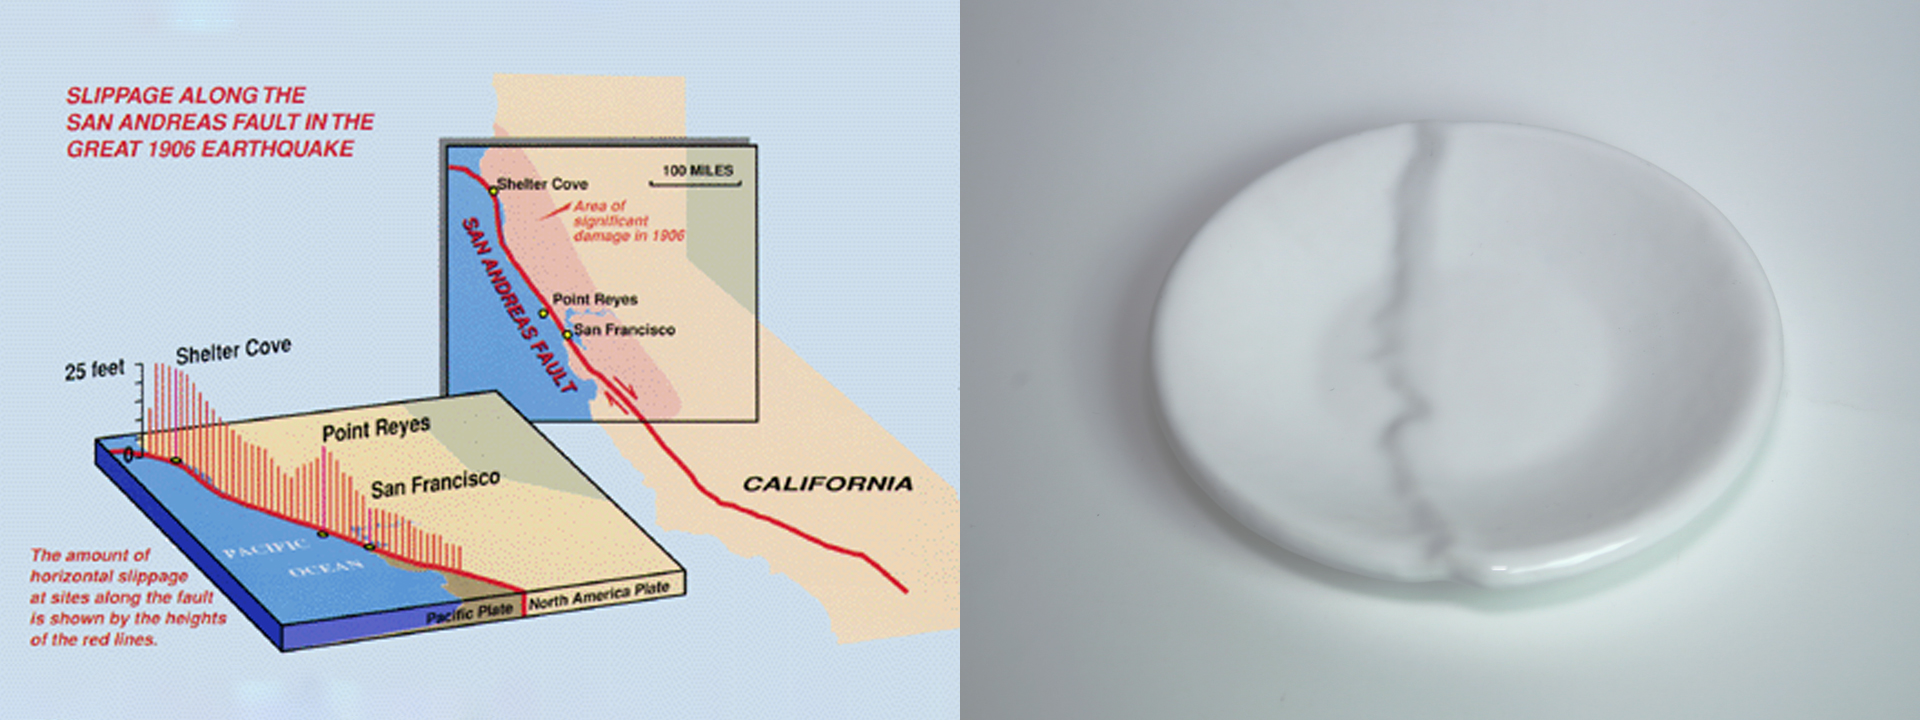 On left, the slippage data of the 1906 San Francisco earthquake. On right, a plate with a crack down the center corresponding to the slippage data.